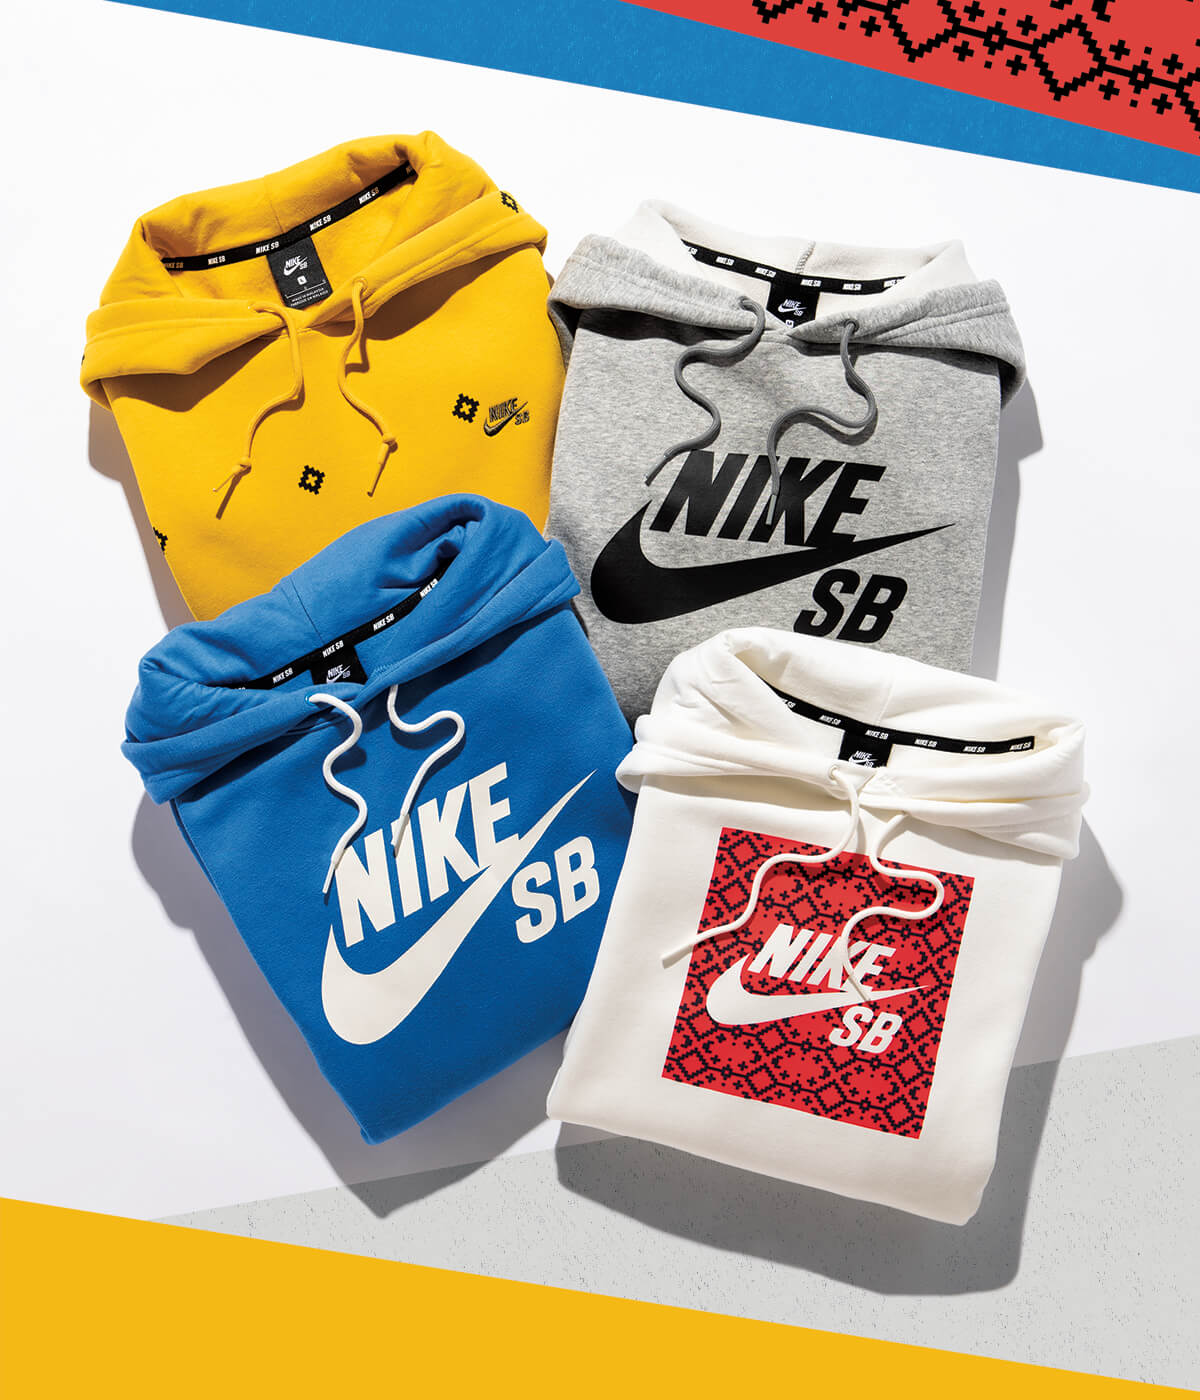 TOP SELLING HOODIES AND NEW STYLES FEAT. NIKE SB & MORE - SHOP HOODIES